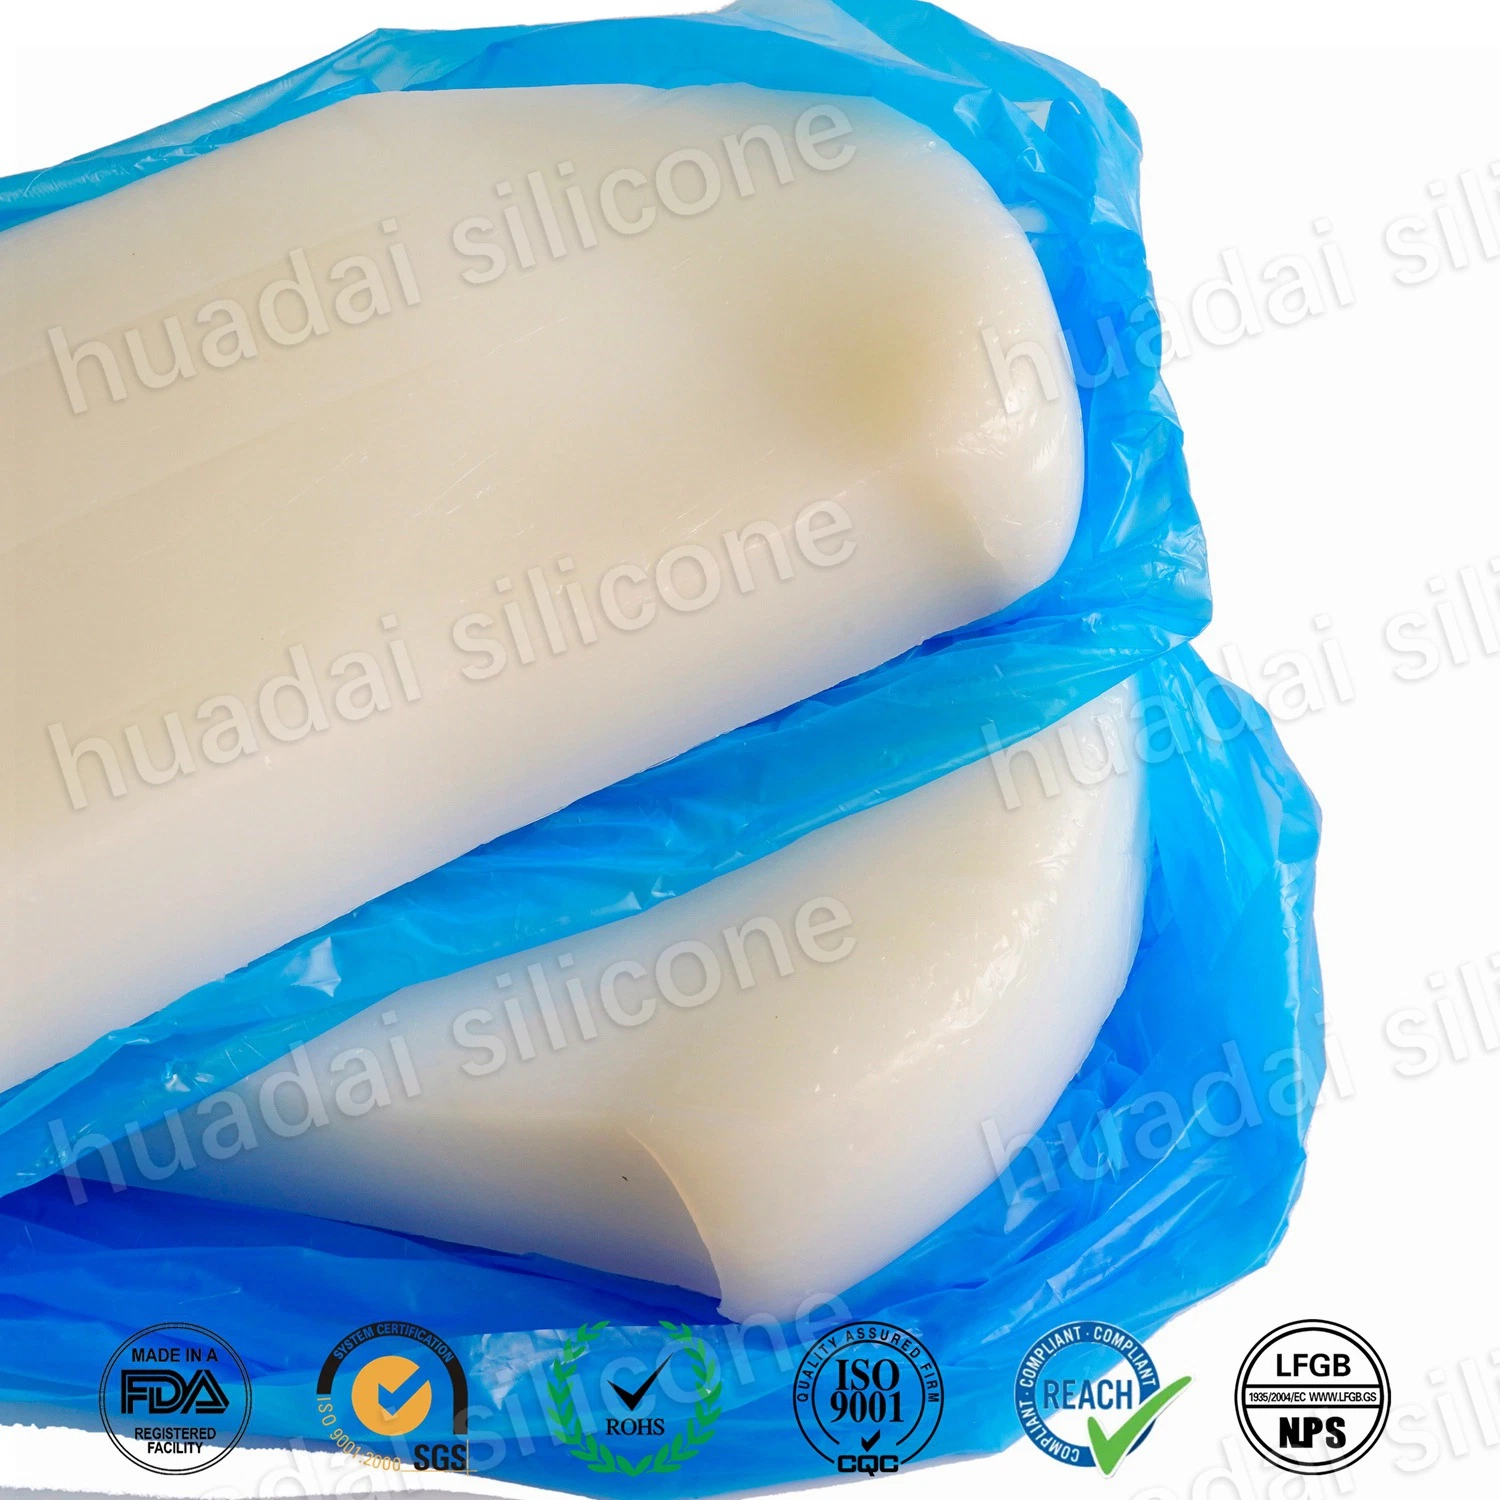 Highly Experienced Manufacturer of Extruded Silicone Rubber Products